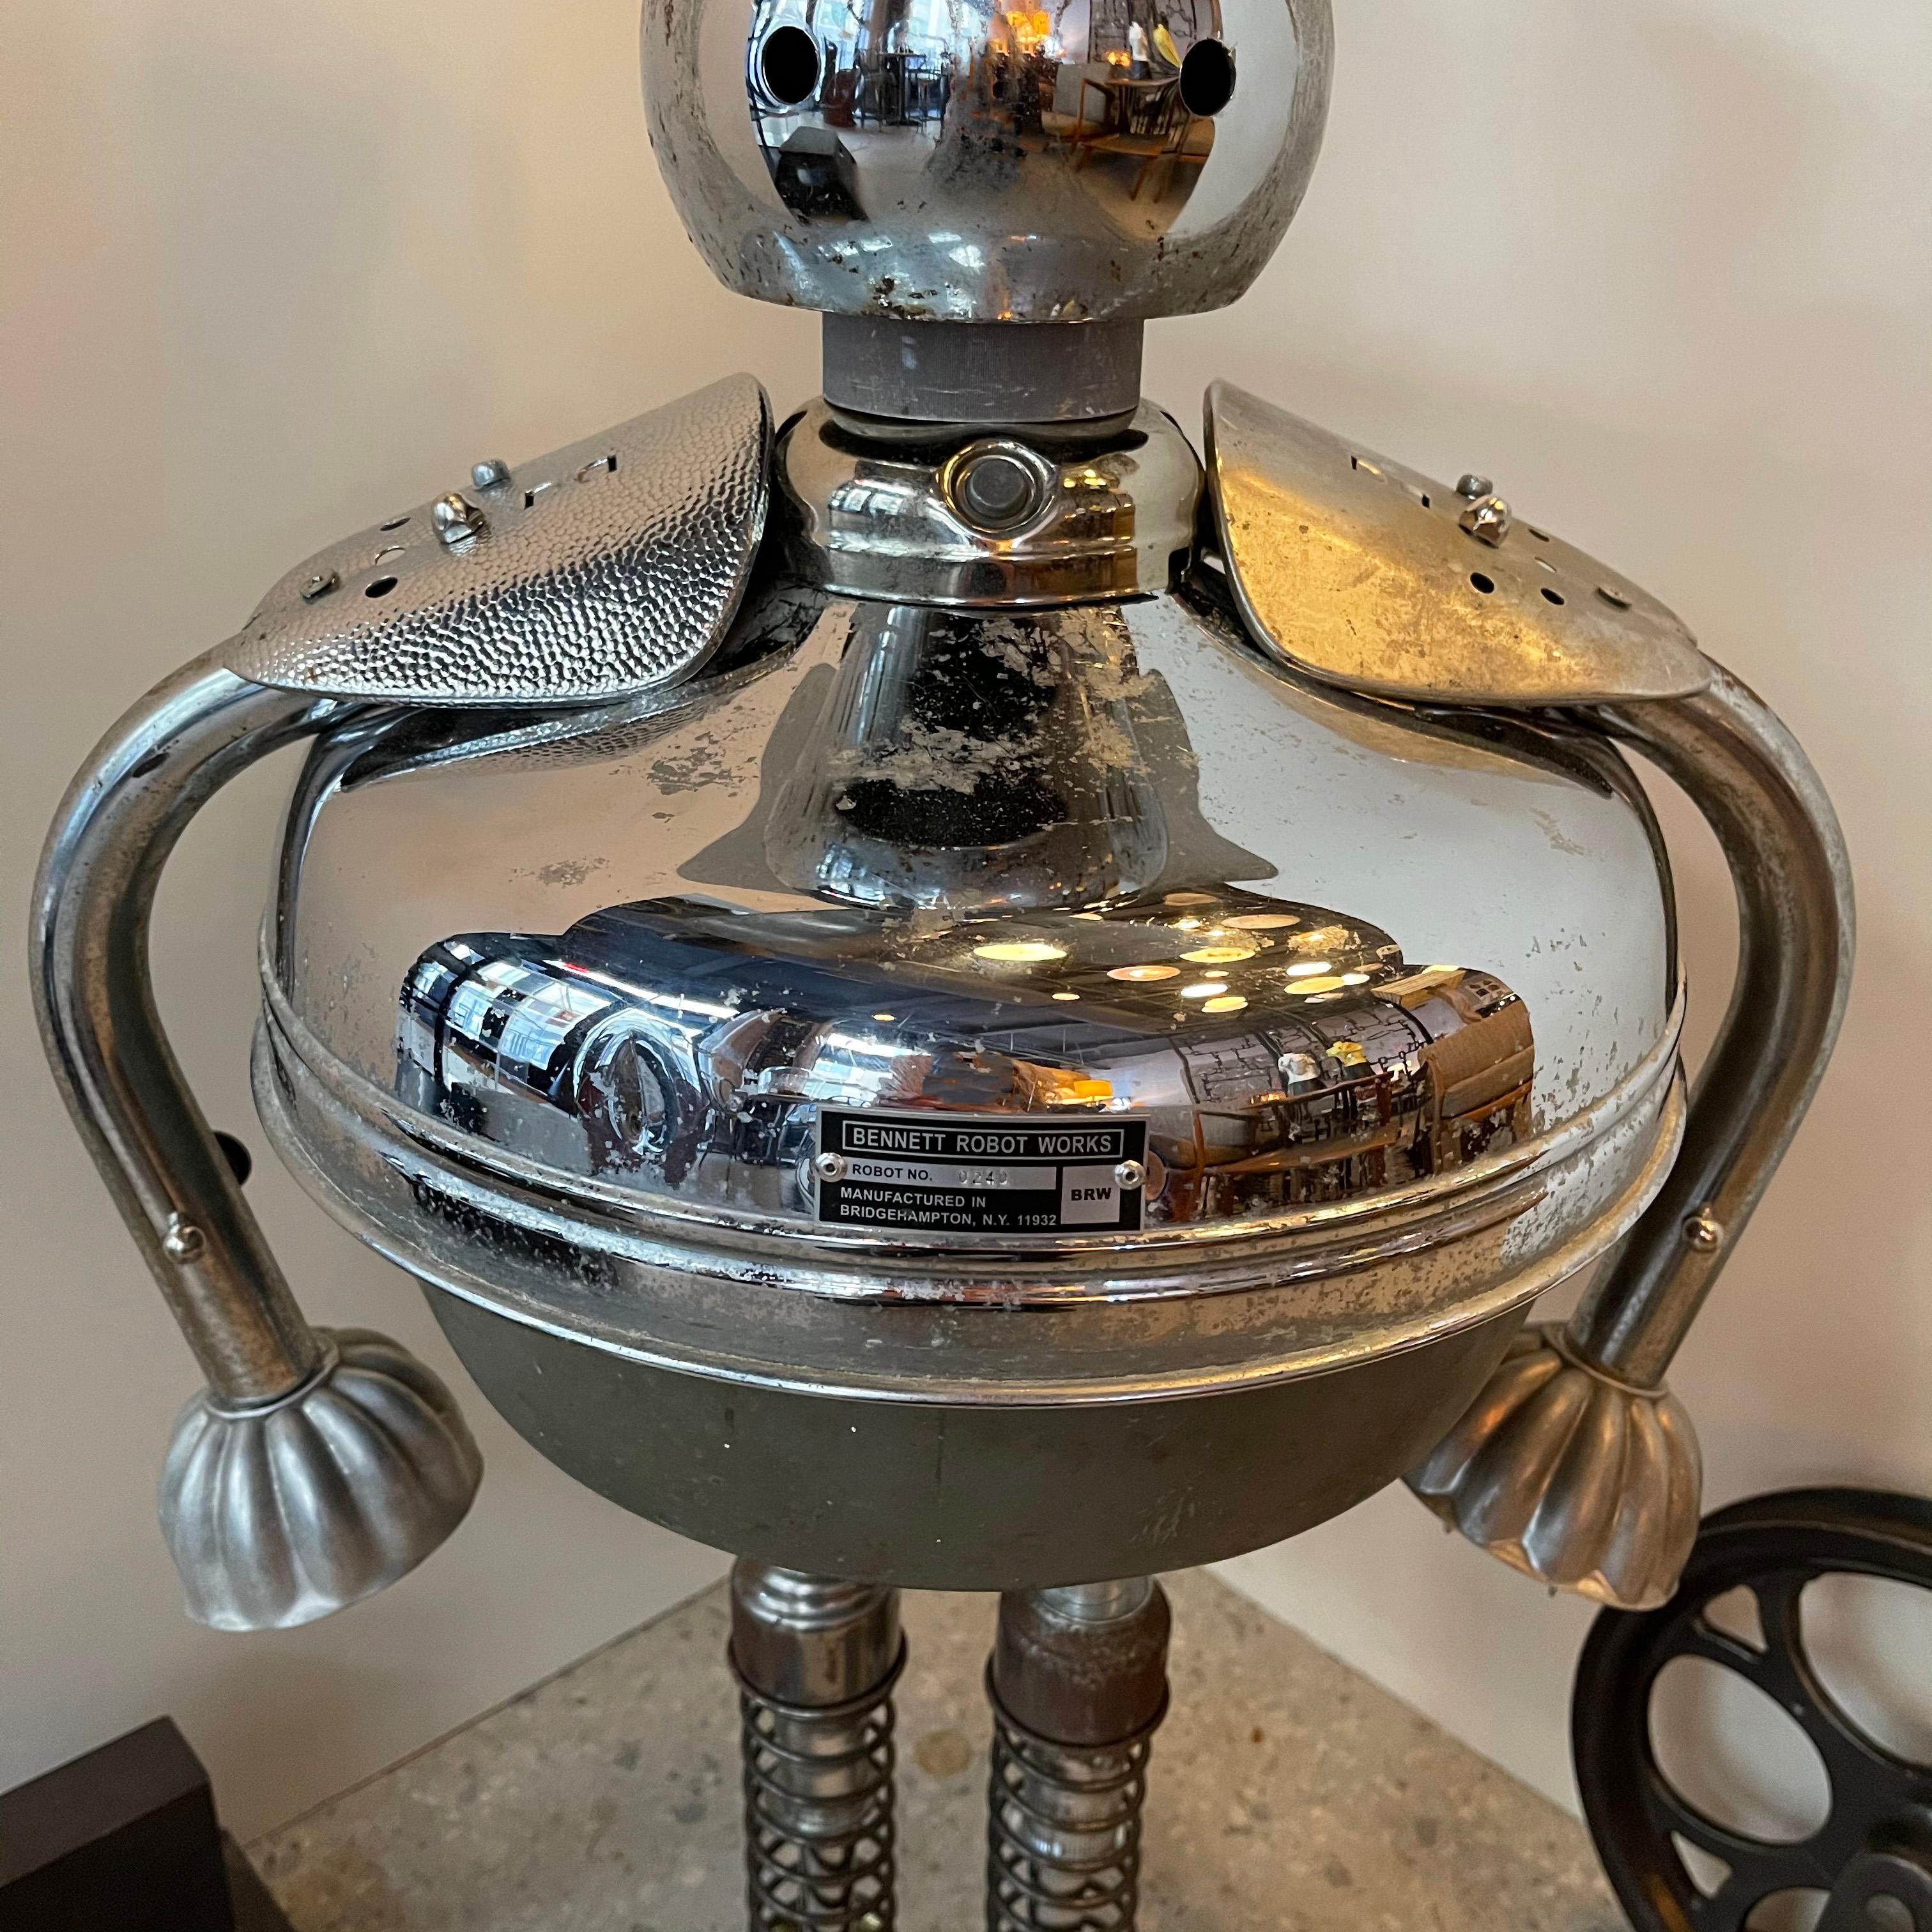 Mid-20th Century Rohl Robot Sculpture by Bennett Robot Works